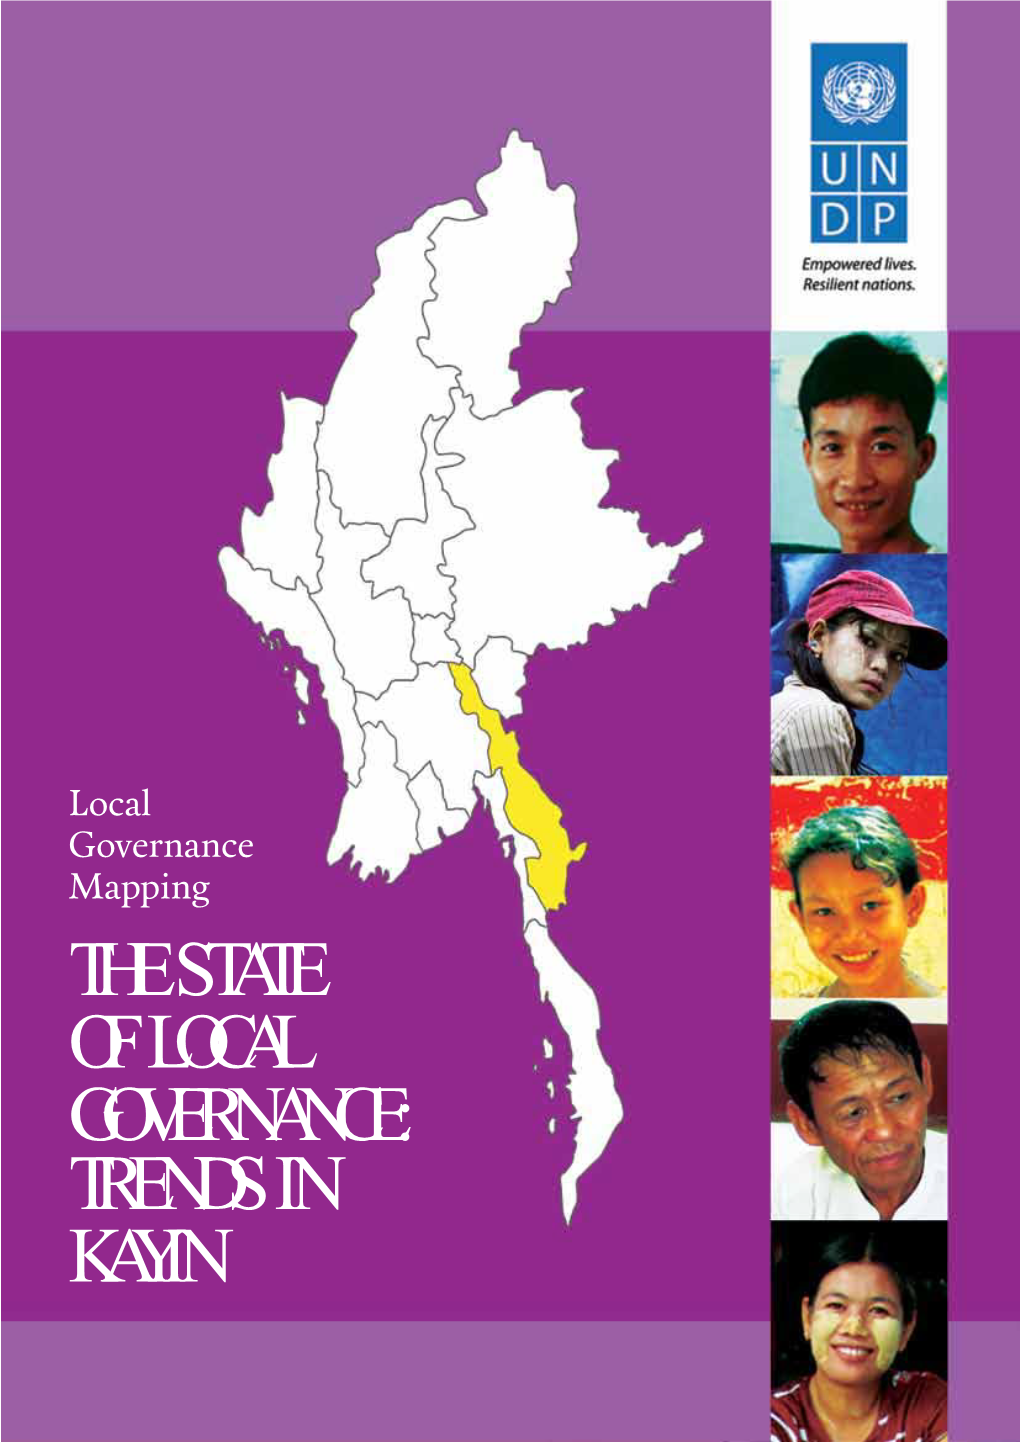 Report the State of Local Governance